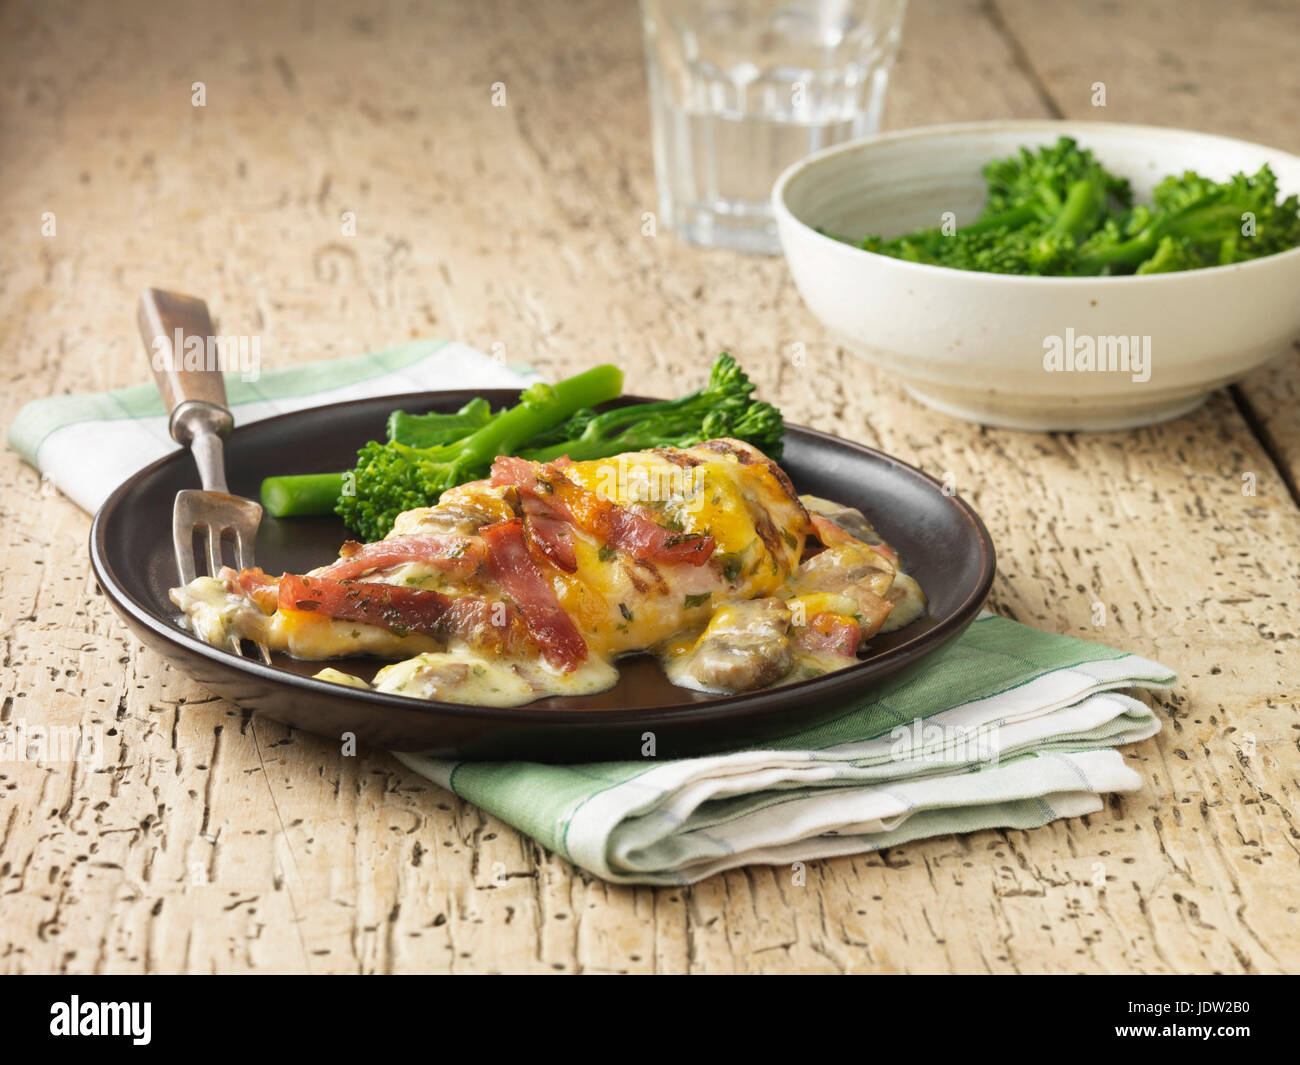 Chicken with cheese and broccoli Stock Photo